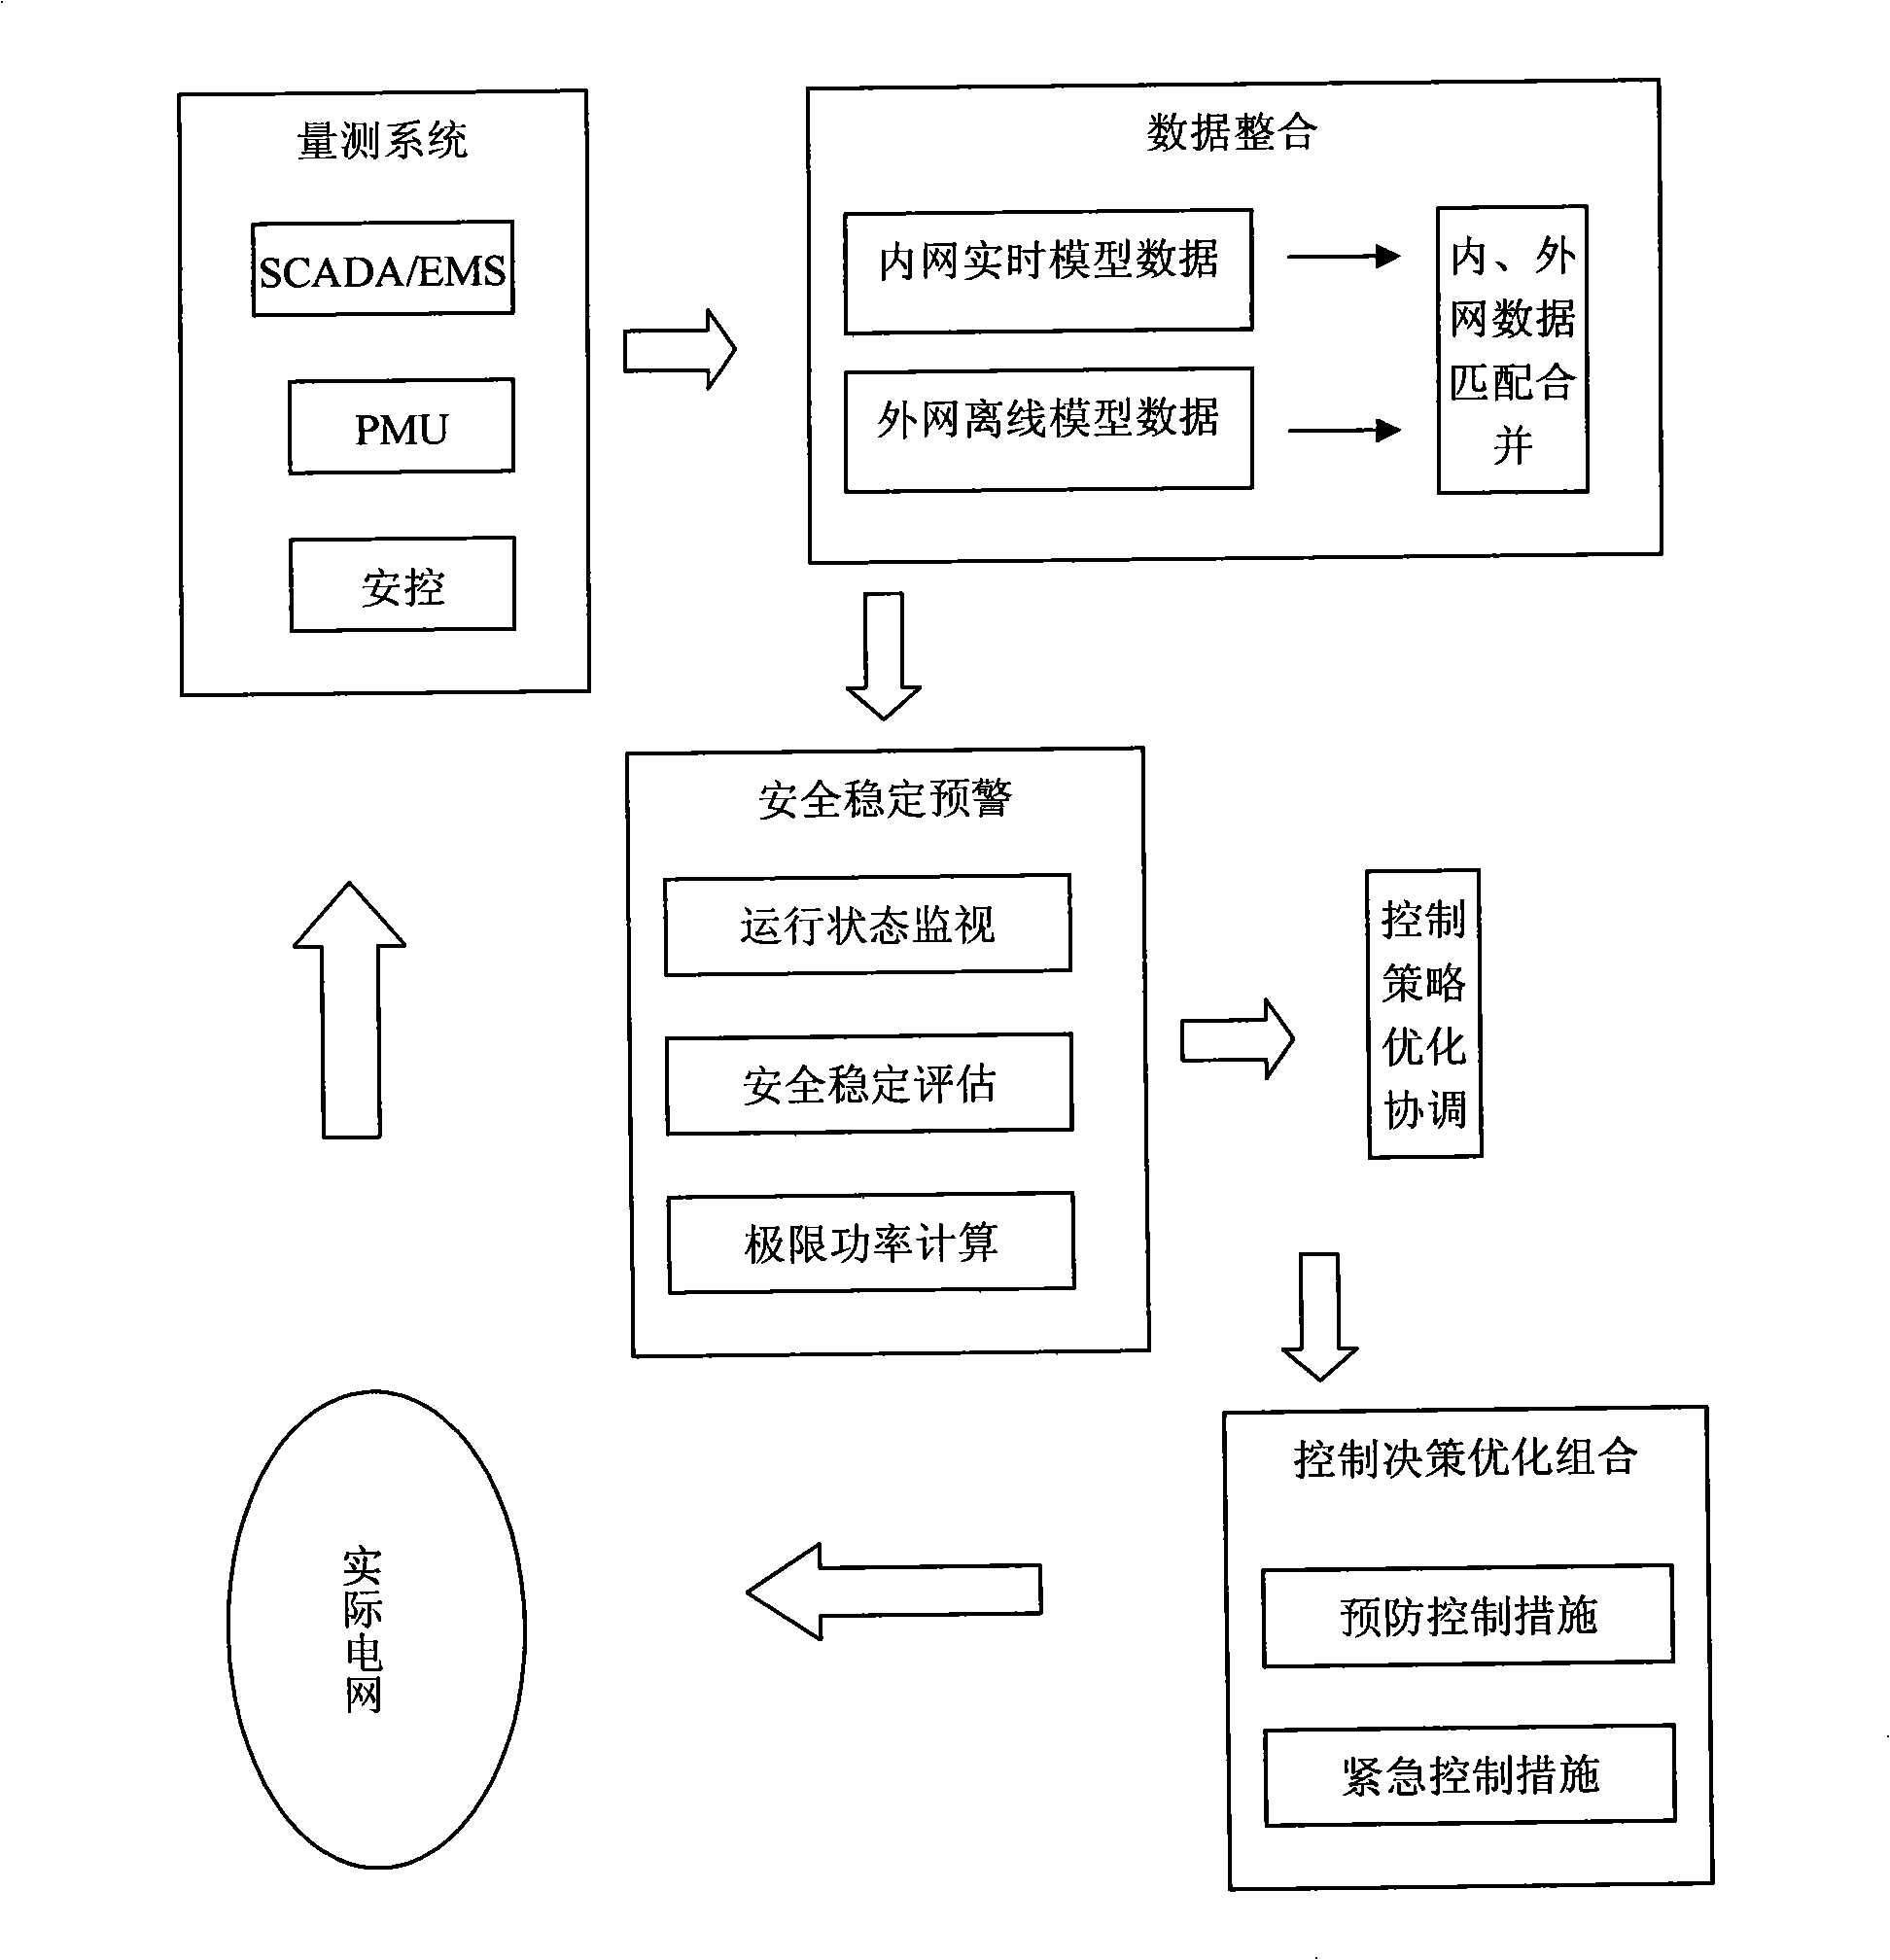 Integrated coordinating control method for security stabilization early warning, preventing control and emergency control